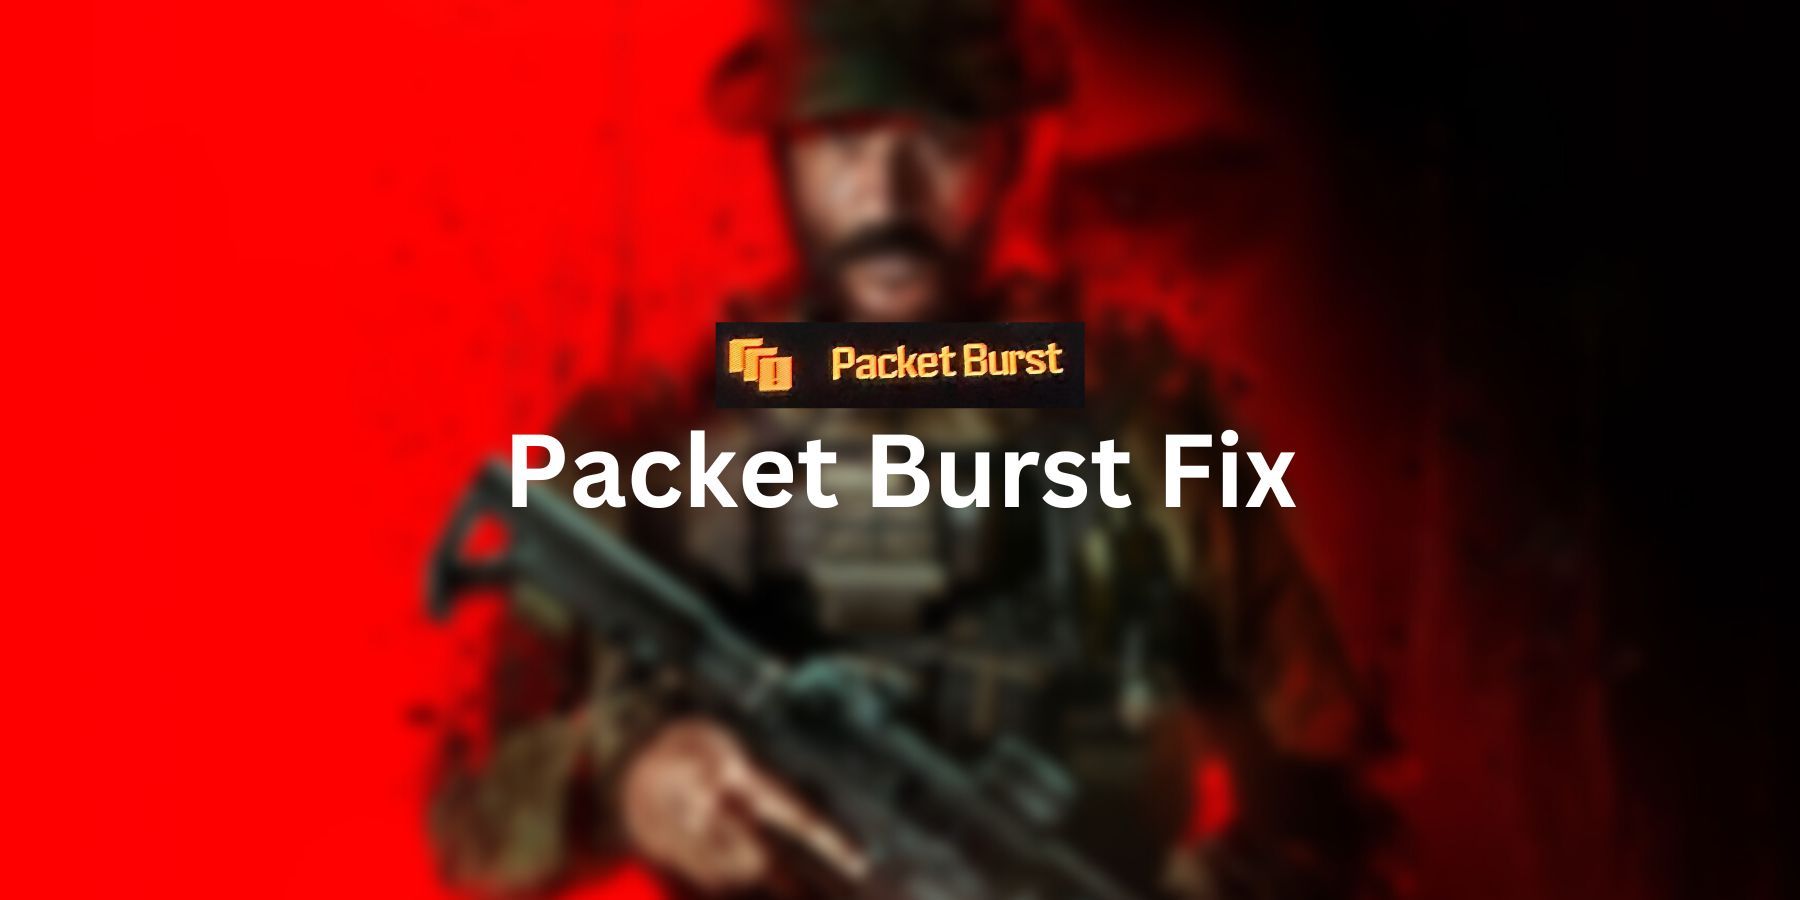 How to Fix the Packet Burst Error in Call of Duty: Modern Warfare 3